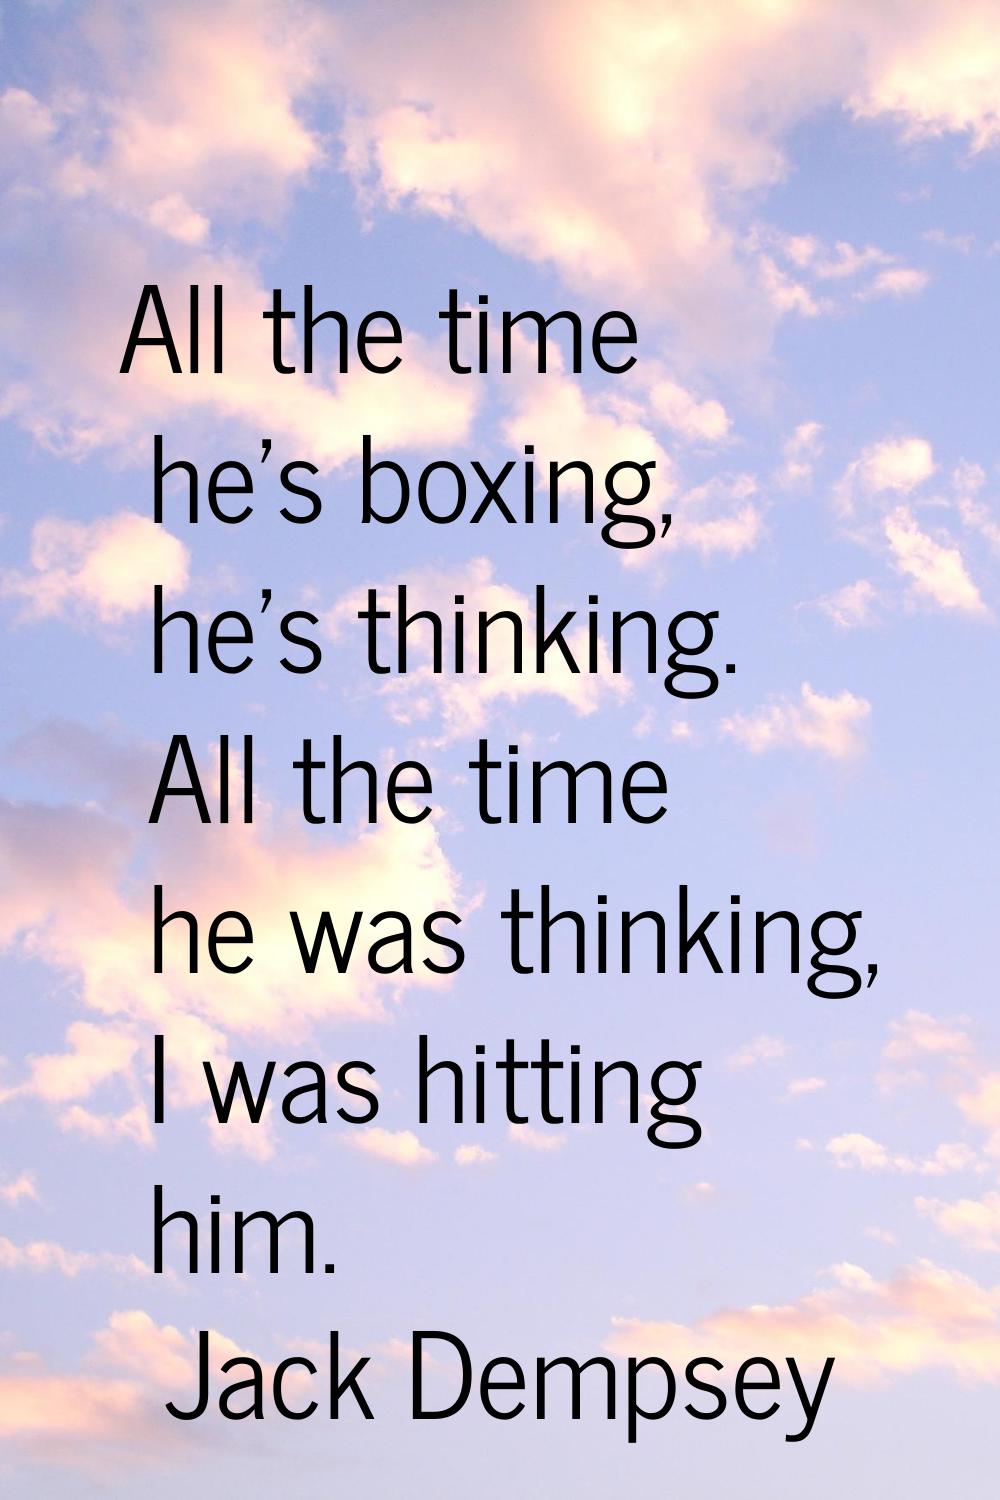 All the time he's boxing, he's thinking. All the time he was thinking, I was hitting him.